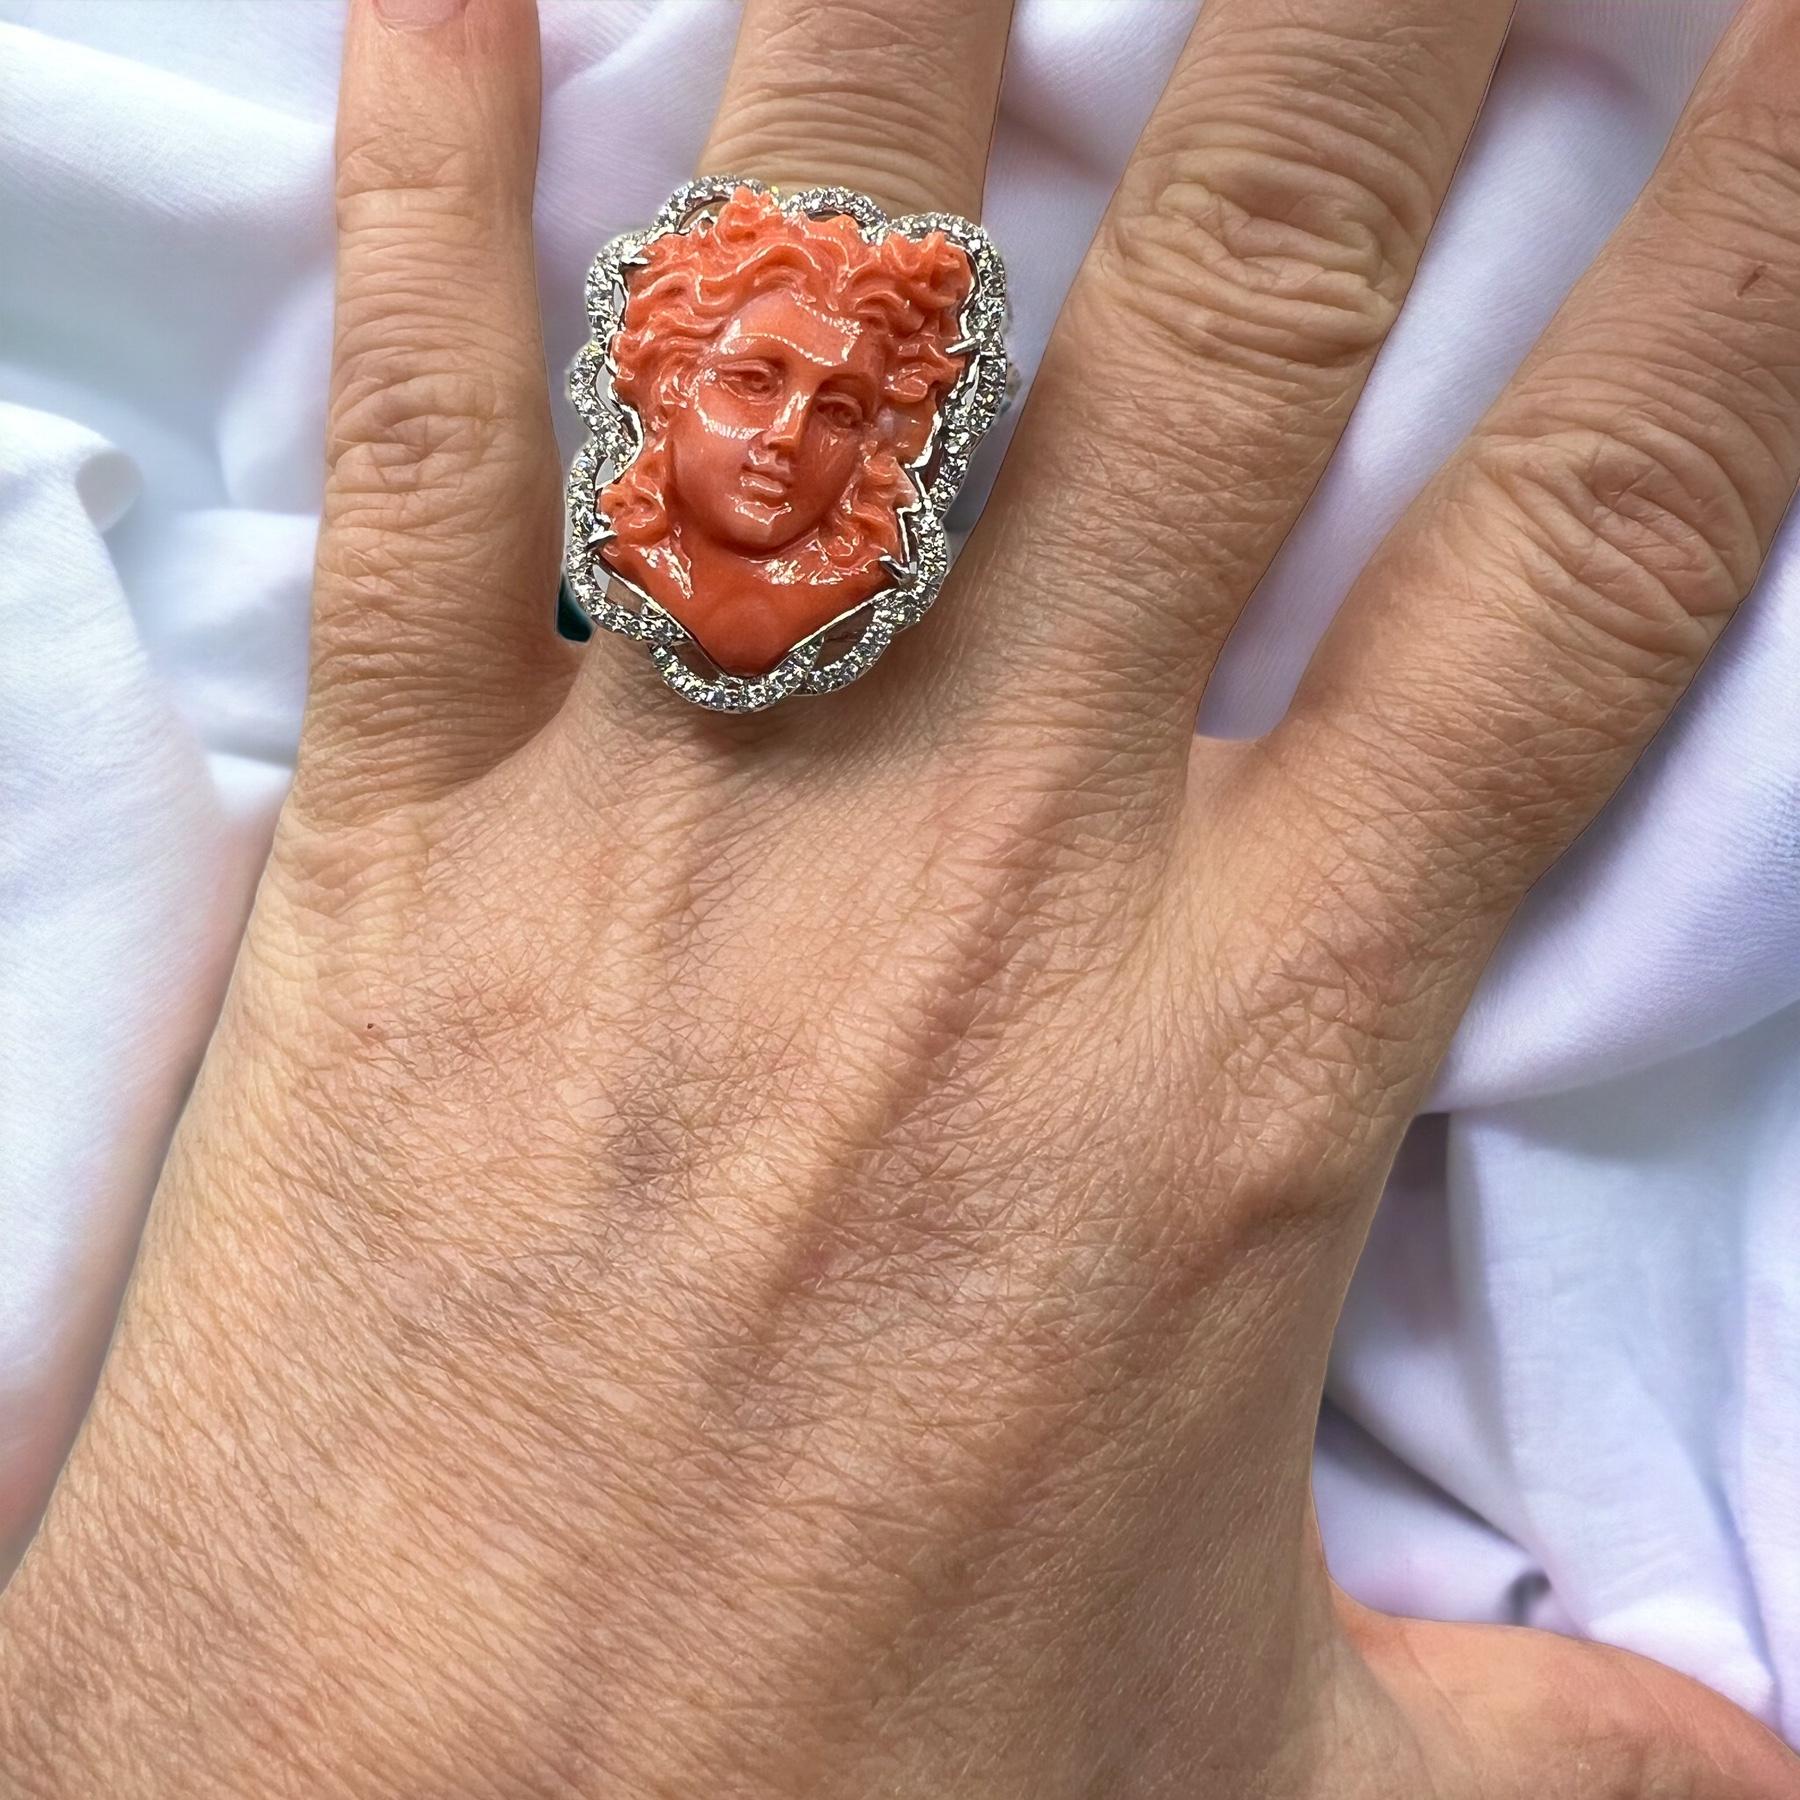 Spectacular Cocktail ring in 18 carat white gold set with a superb cameo in coral surrounded by diamonds
spectacular ring in 18 carat white gold set with a cameo in coral representing an elegant profile of a woman.
We will notice the finesse of the